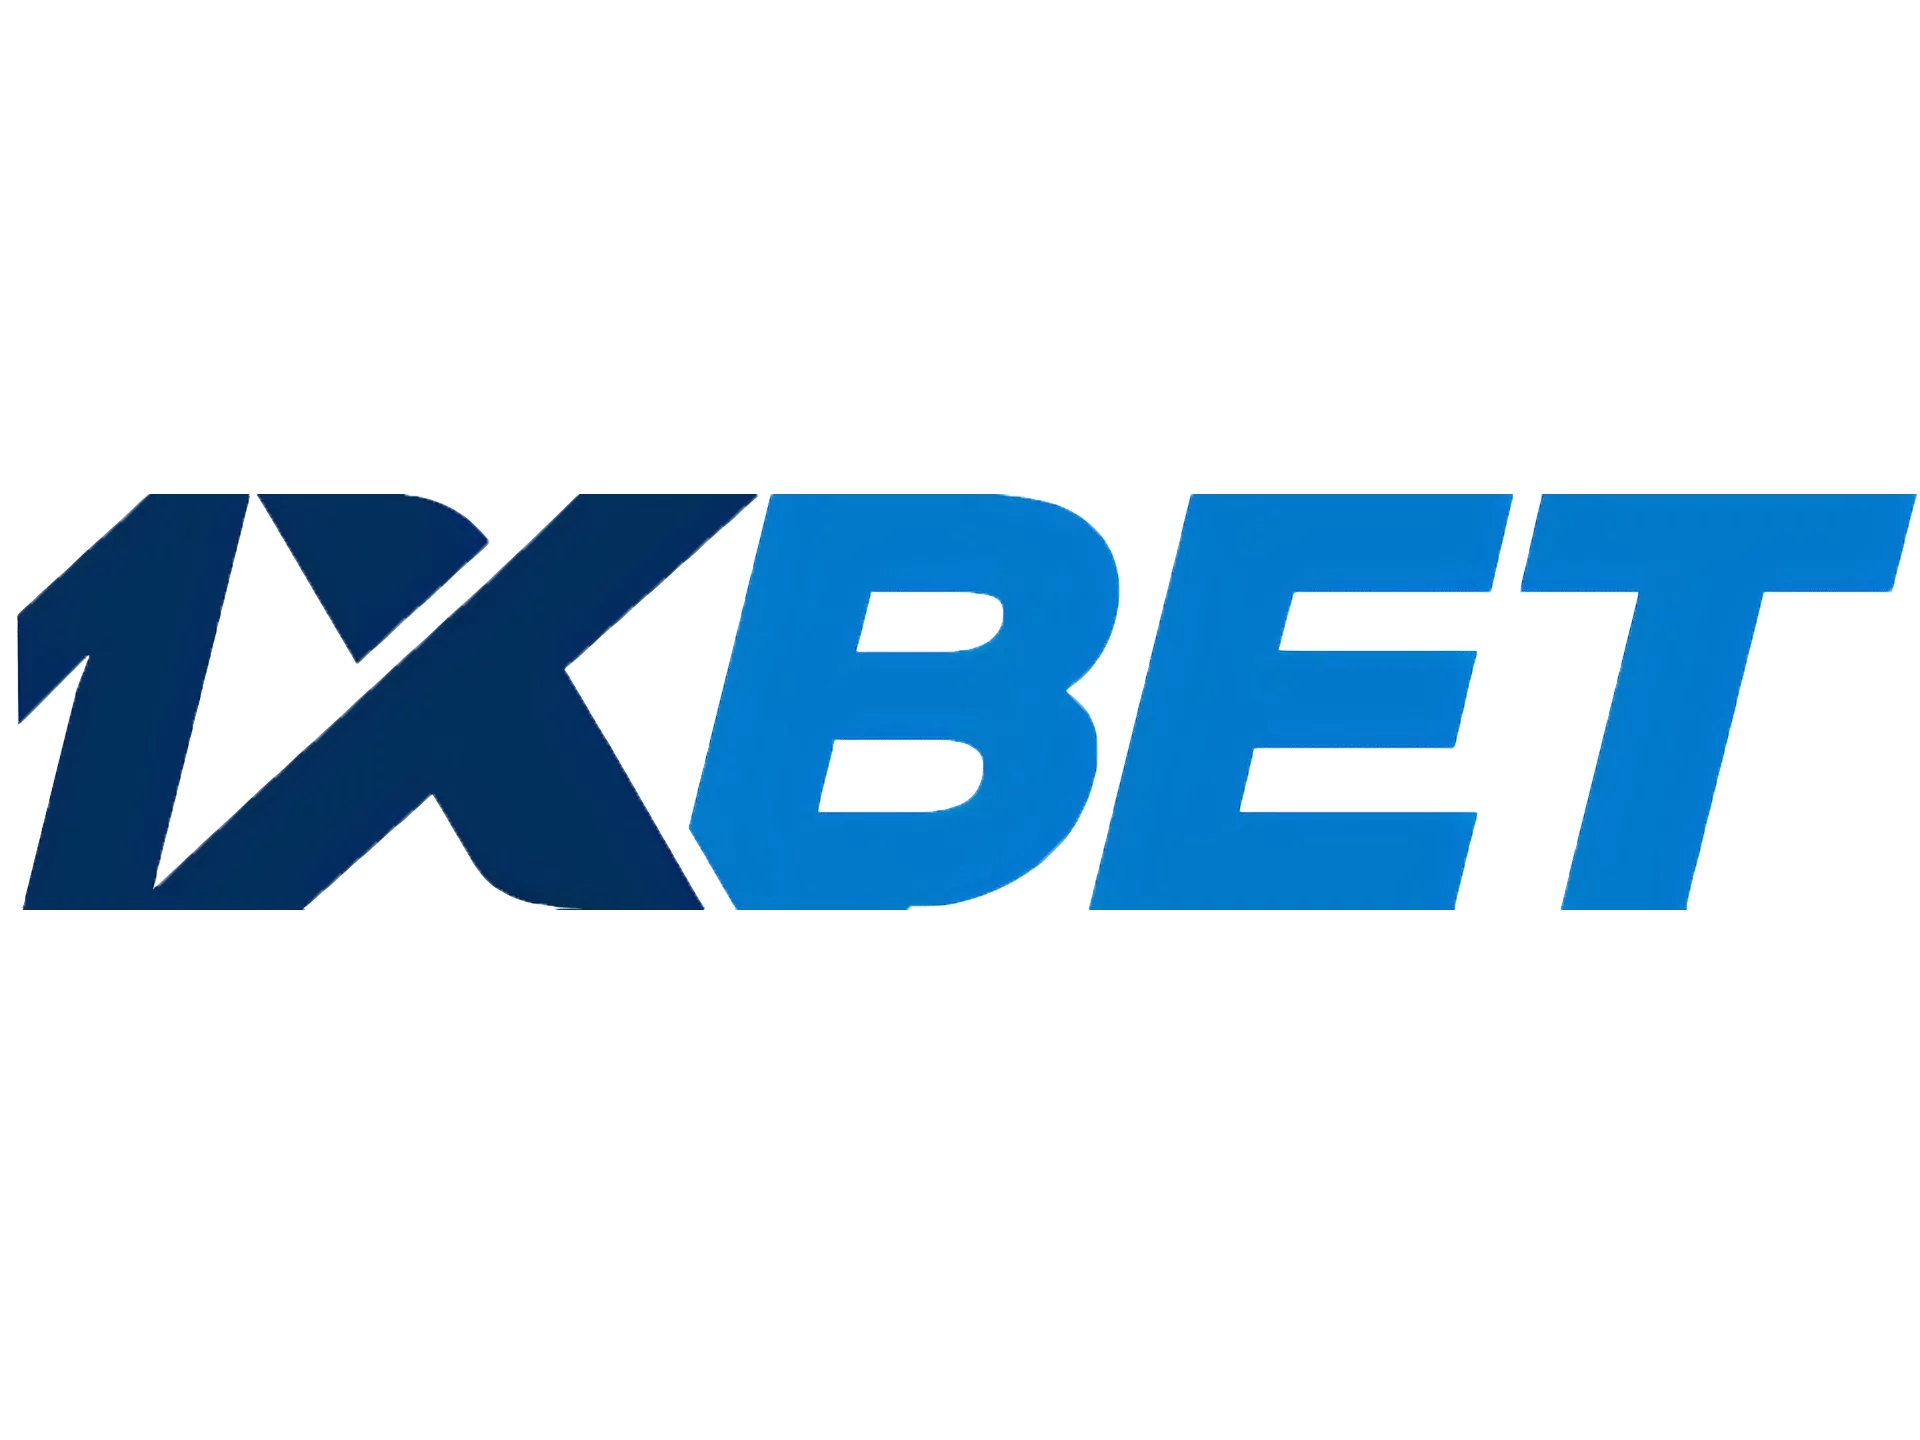 1xBet is legal in Pakistan for cricket betting.